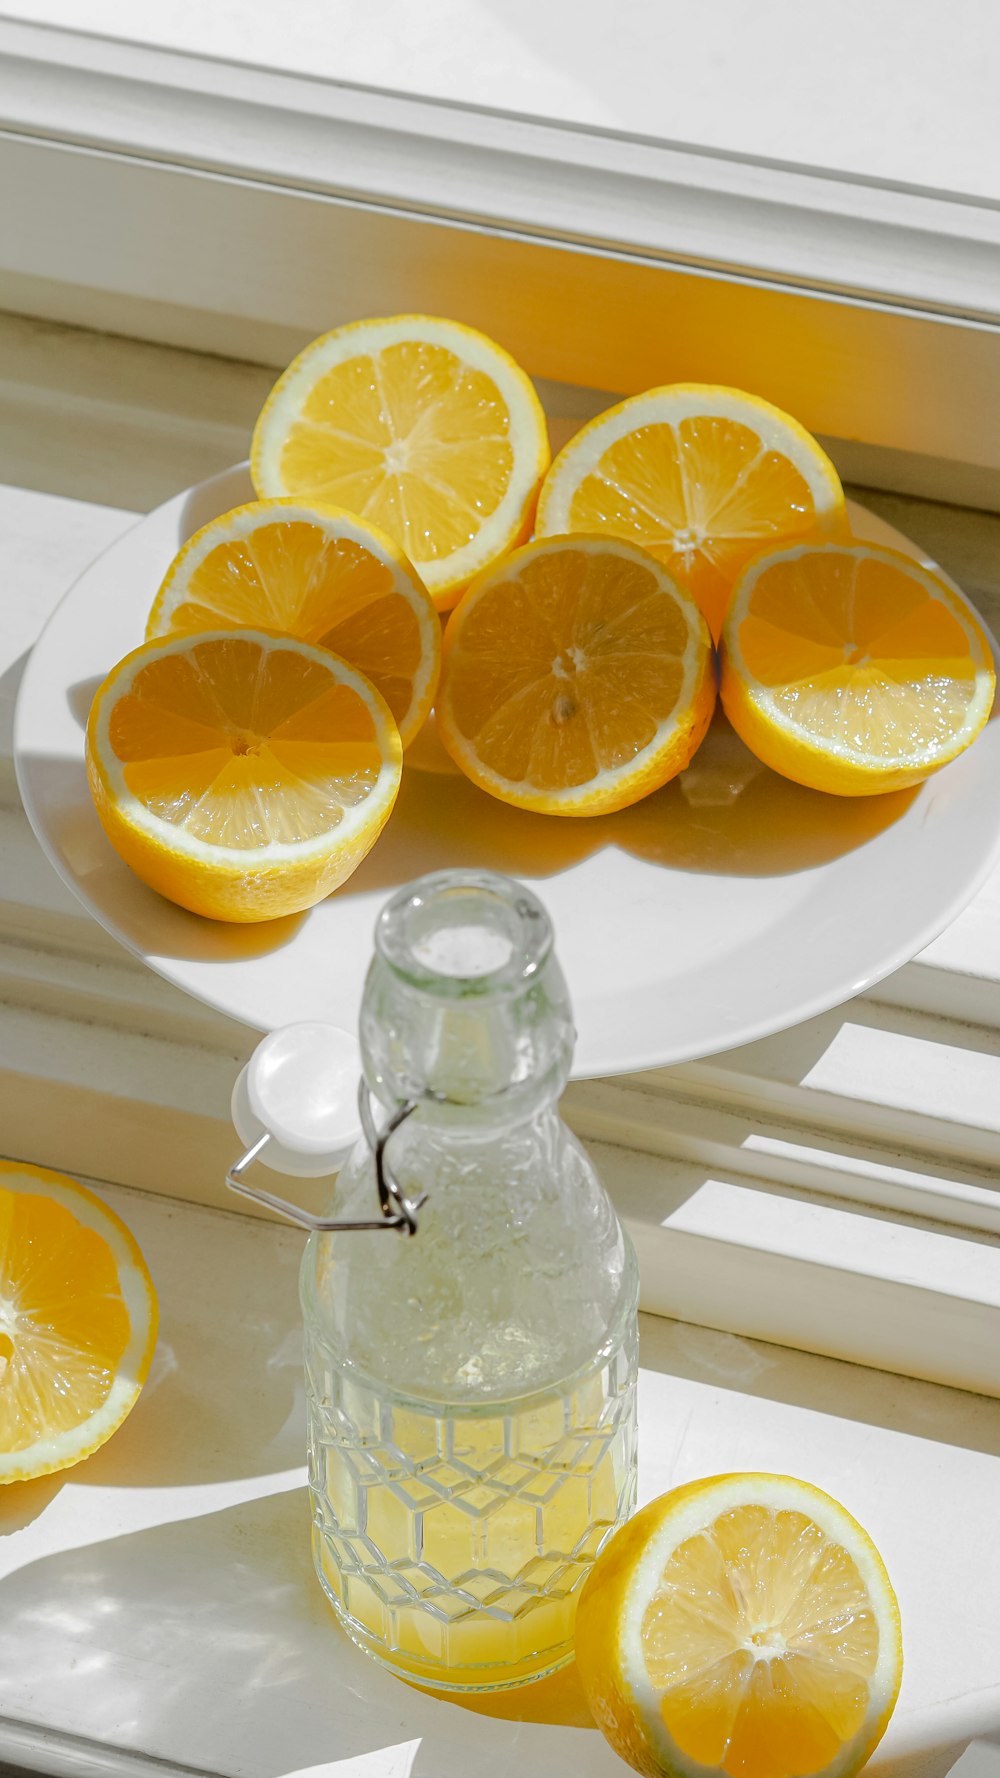 a plate of lemons and a bottle of water on a window sill